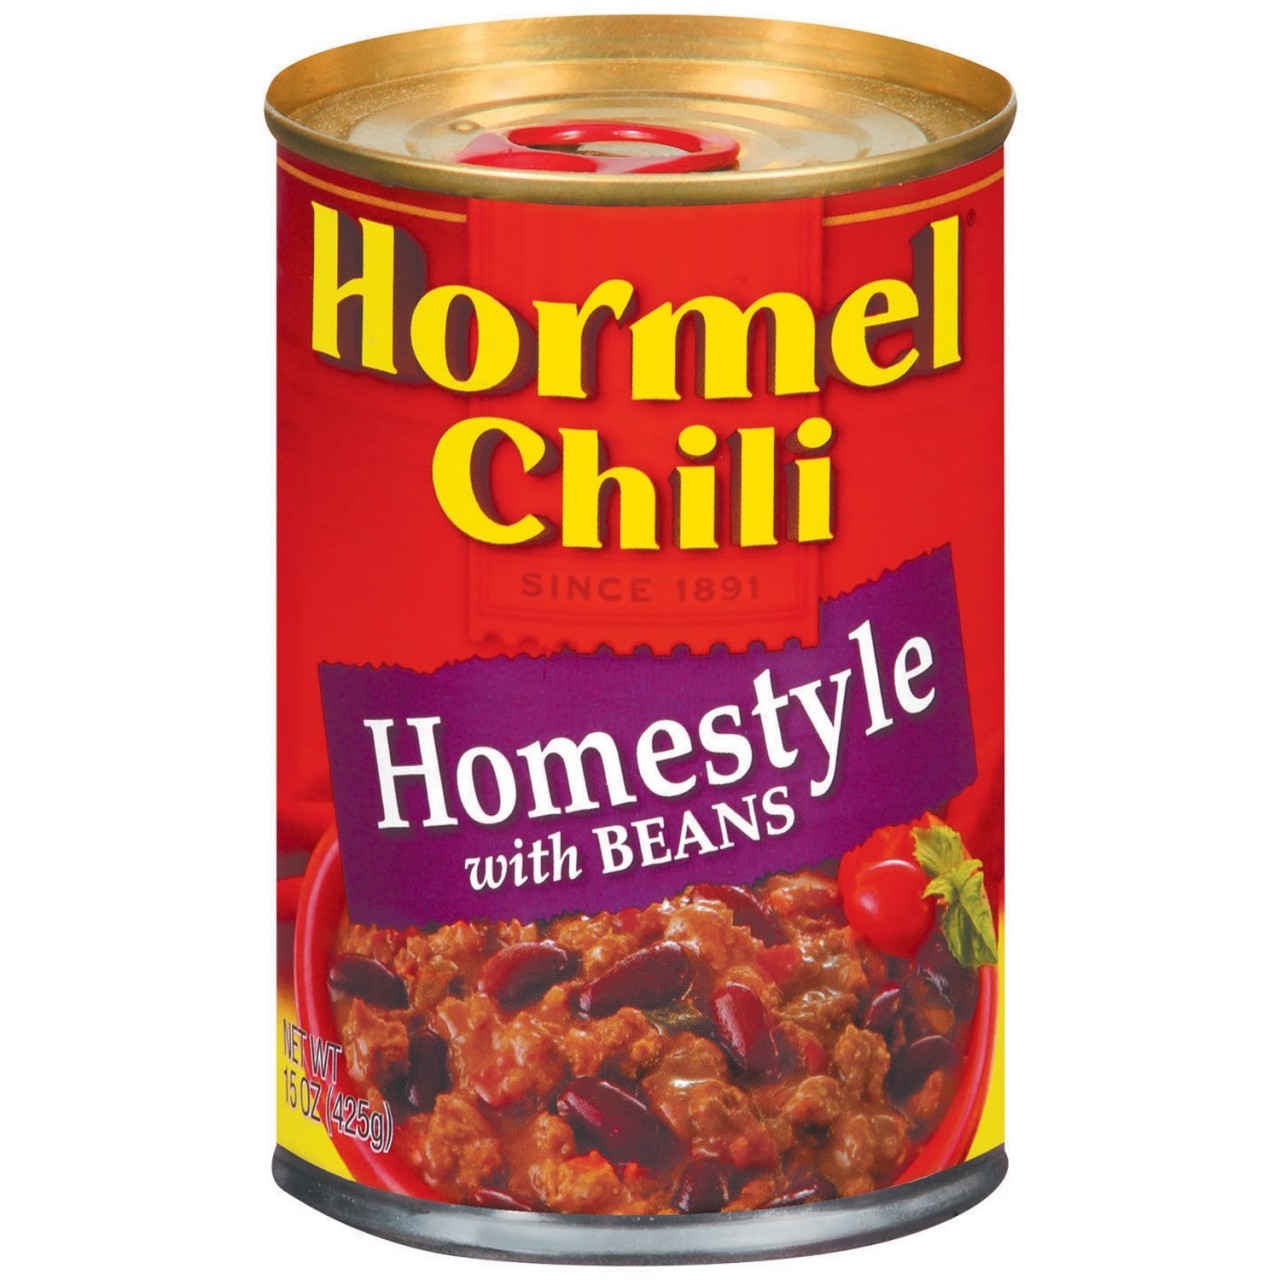 HORMEL CHILI HOMESTYLE WITH BEANS 15oz